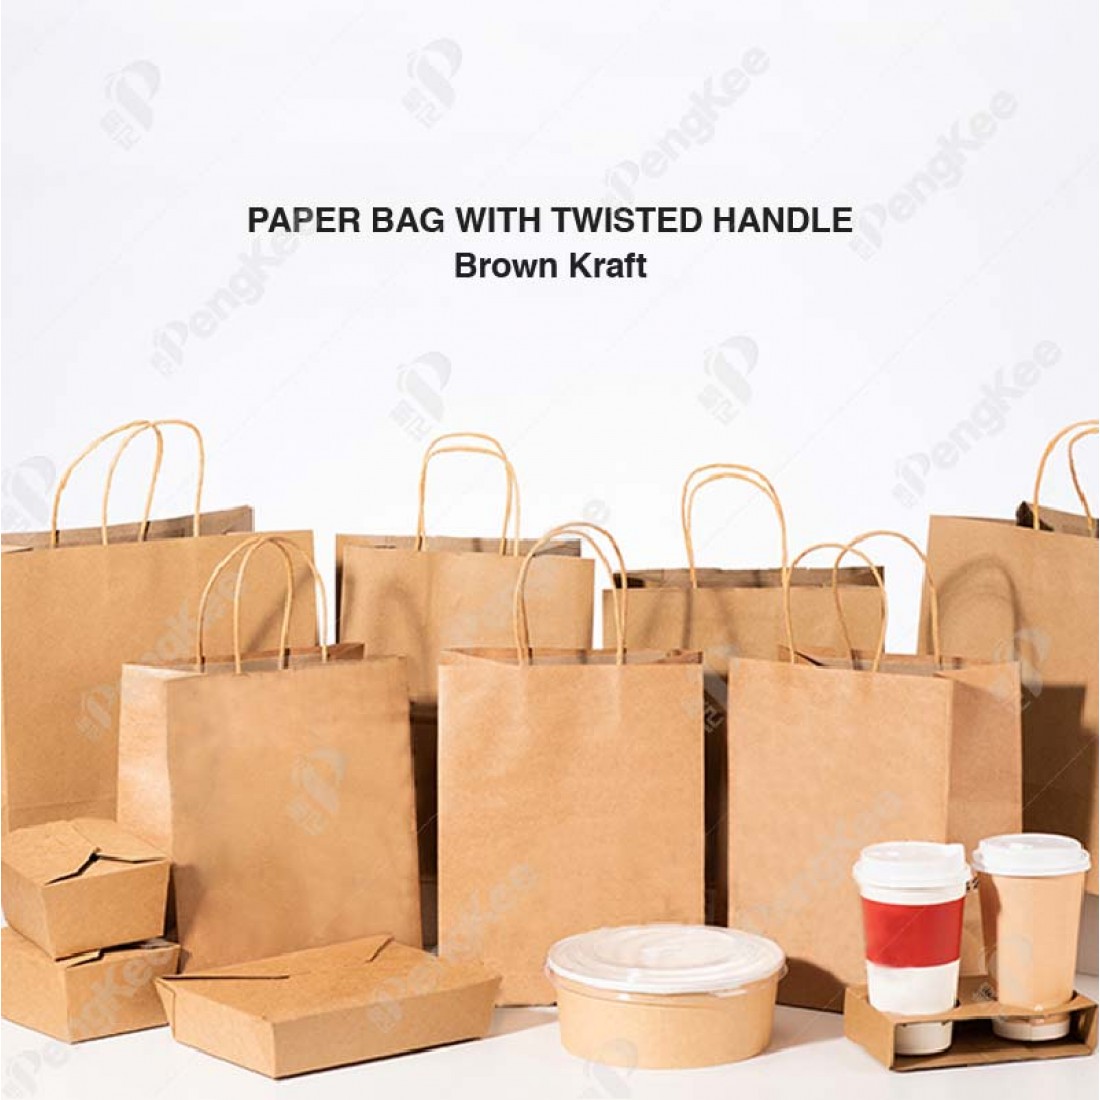 BROWN TWISTED HANDLE PAPER BAG NO.1- 27 x 21 x 11 (CM)